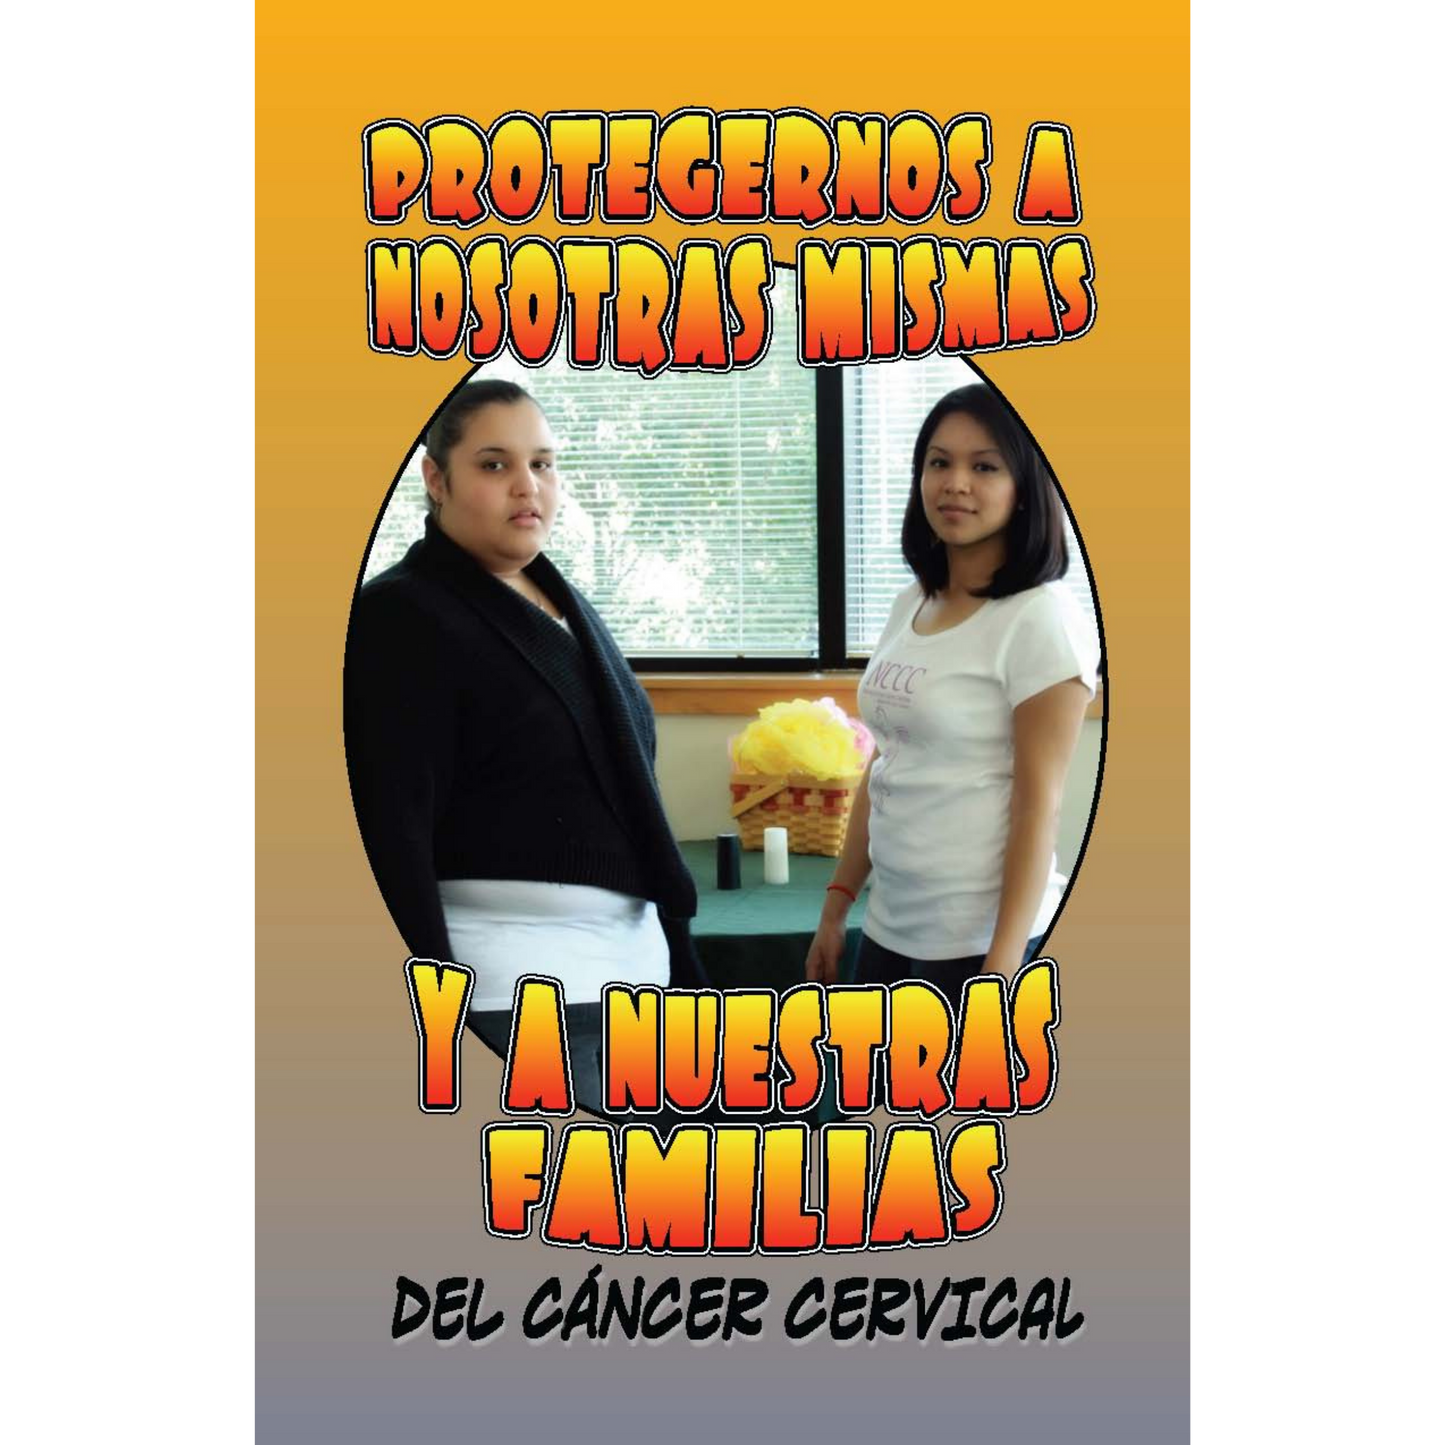 Protecting Ourselves and Our Families from Cervical Cancer/Protegernos a Nosotras Mismas y a Nuestras Familias del Cáncer Cervical